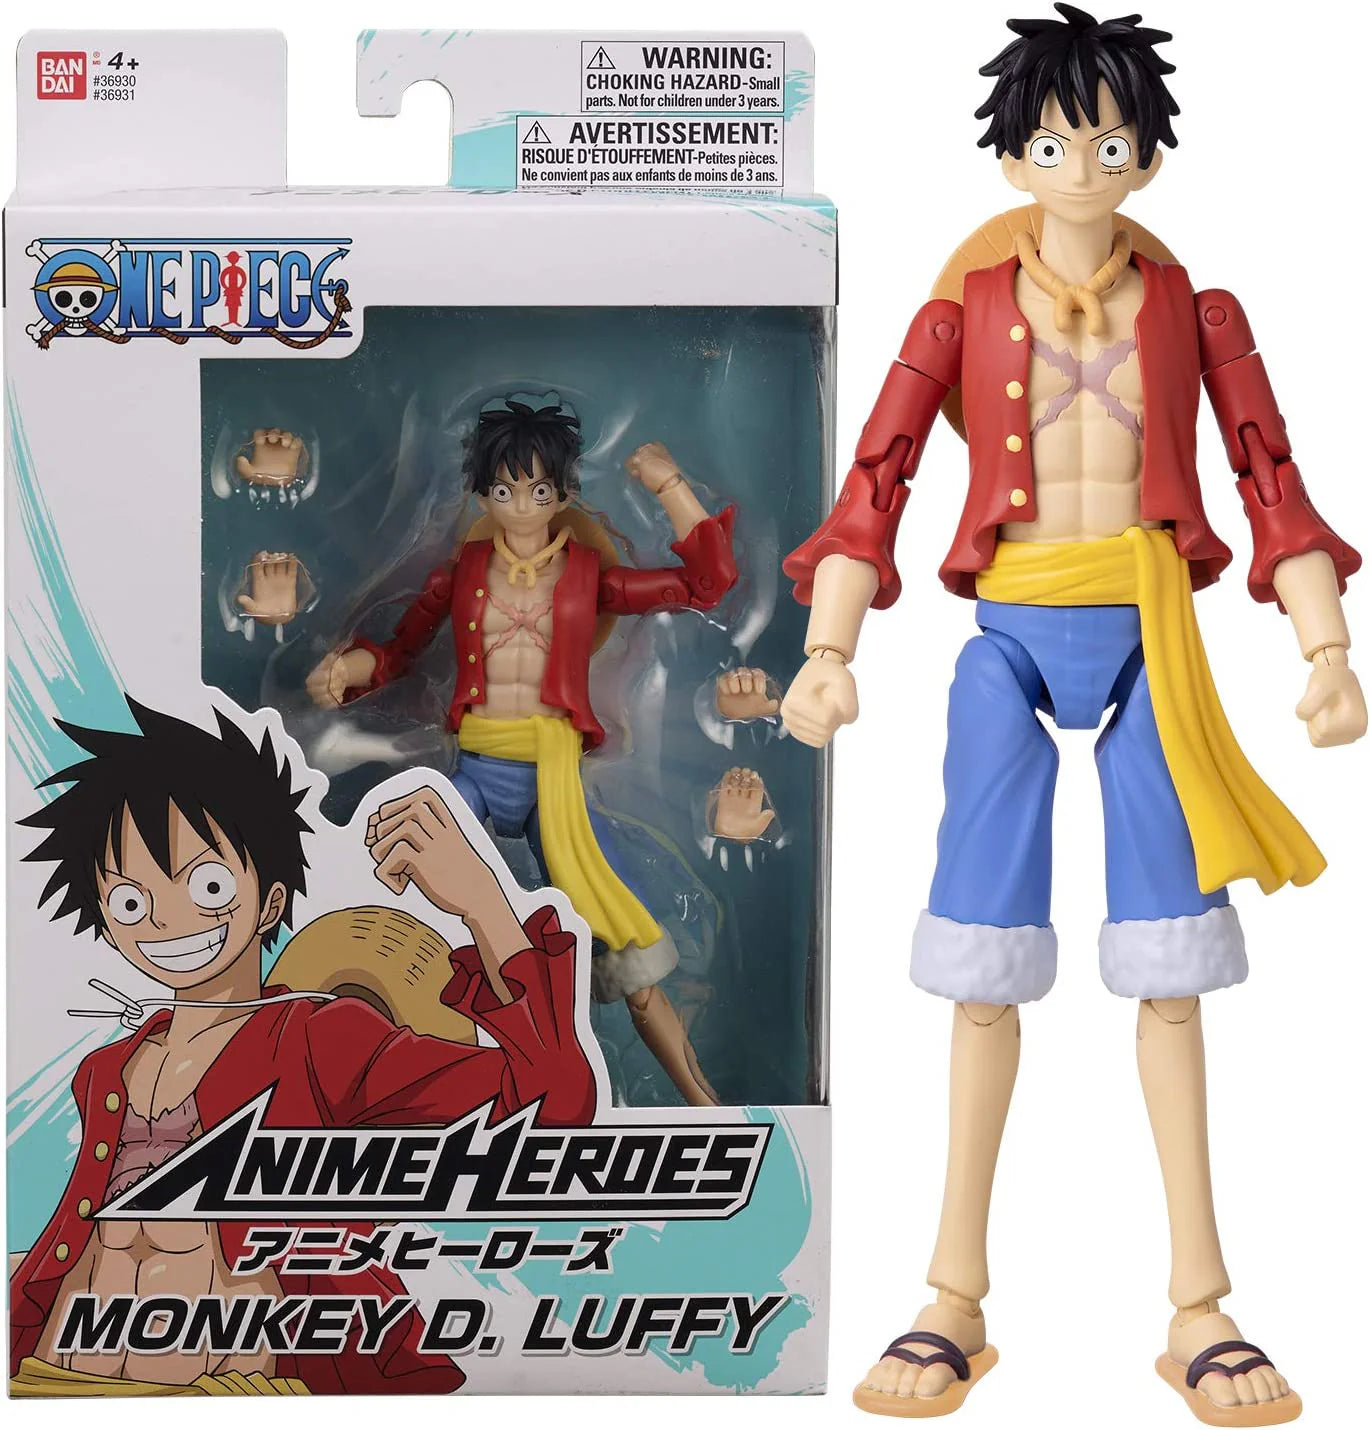 Anime Heroes Monkey D Luffy 6.5" Action Figure